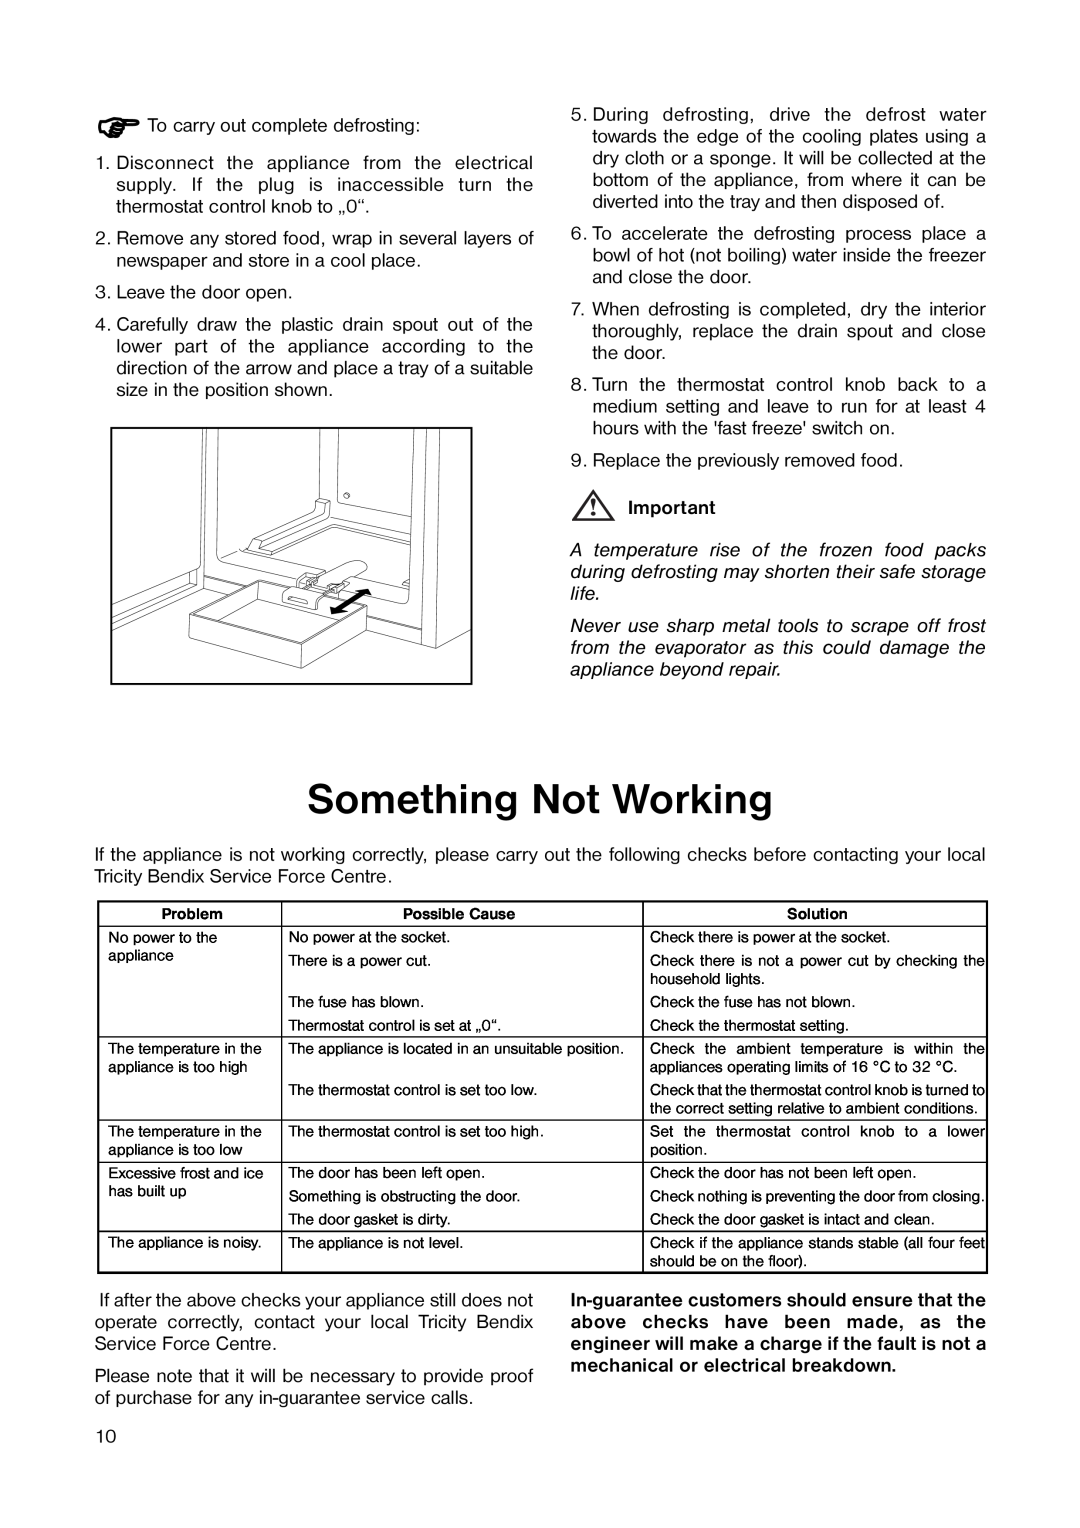 Tricity Bendix TB 44 UF installation instructions Something Not Working 